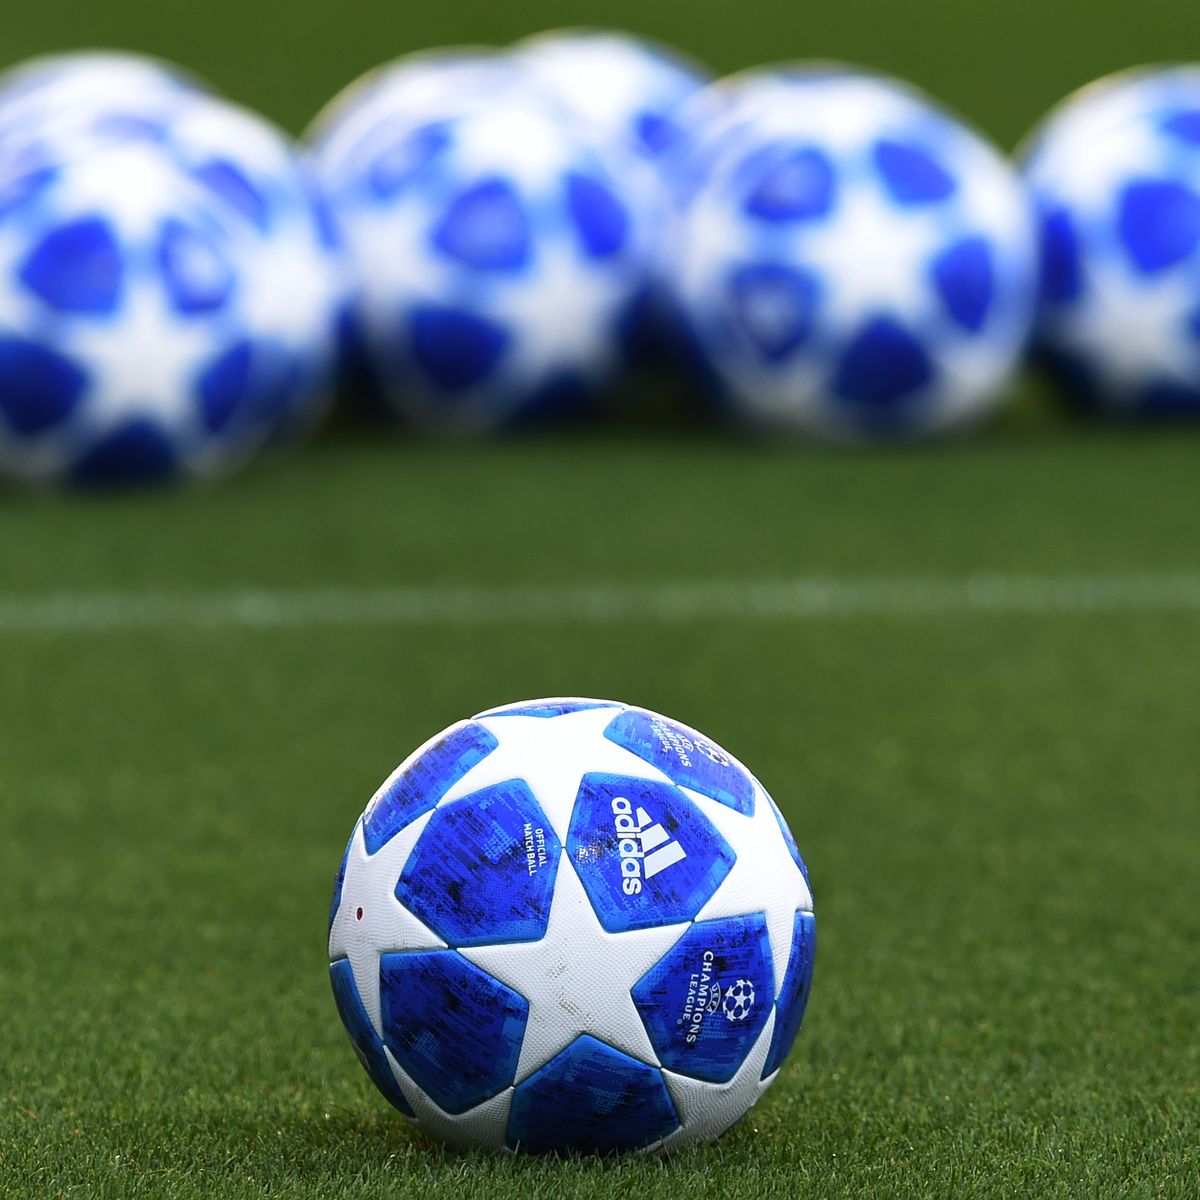 Why is the new Champions League ball blue? Evening News